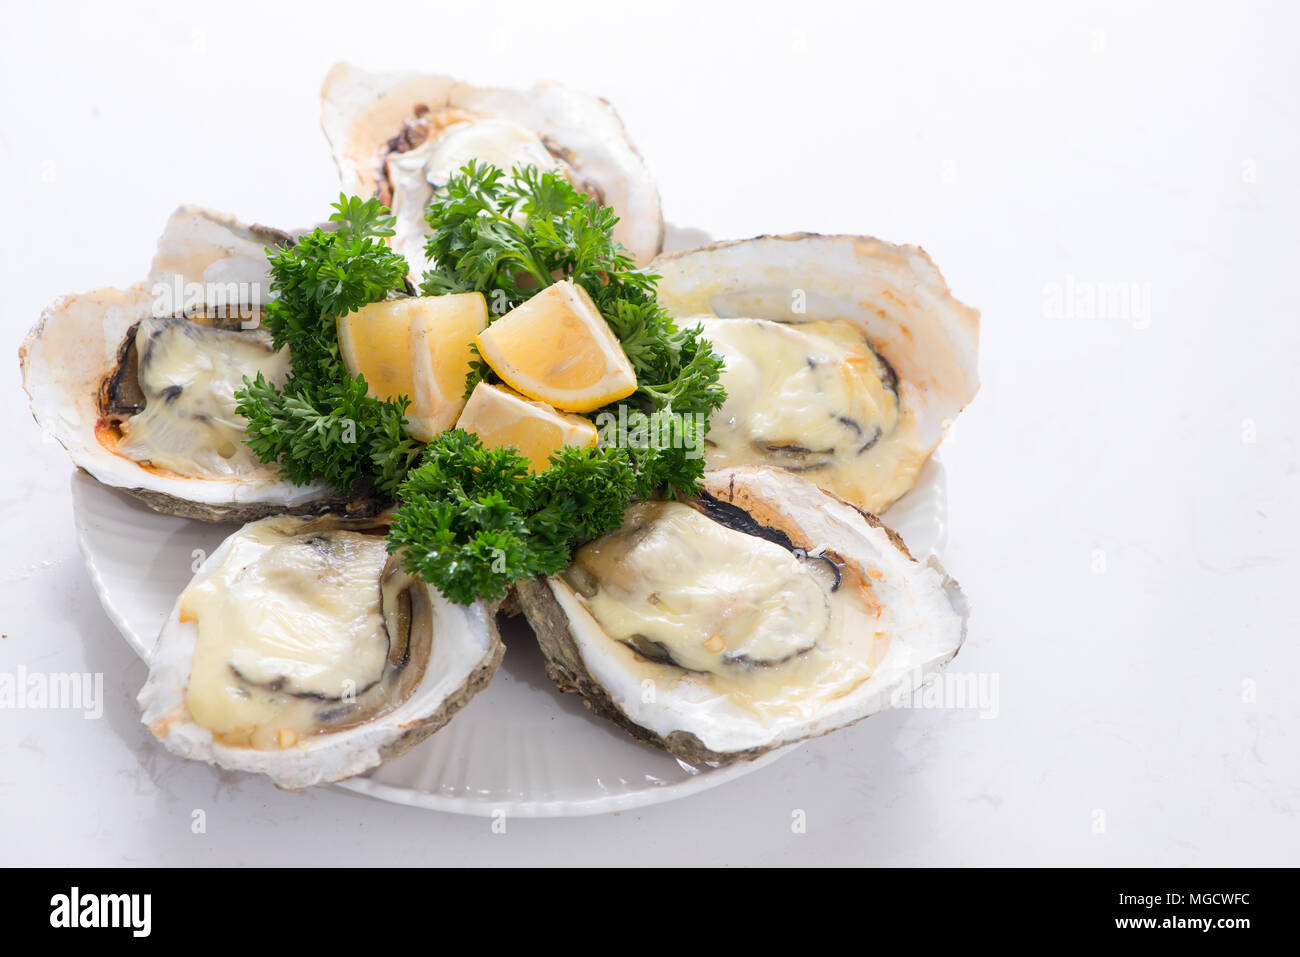 Opened oysters, ice and lemon on wooden board over stone table. Half dozen. With copy space Stock Photo